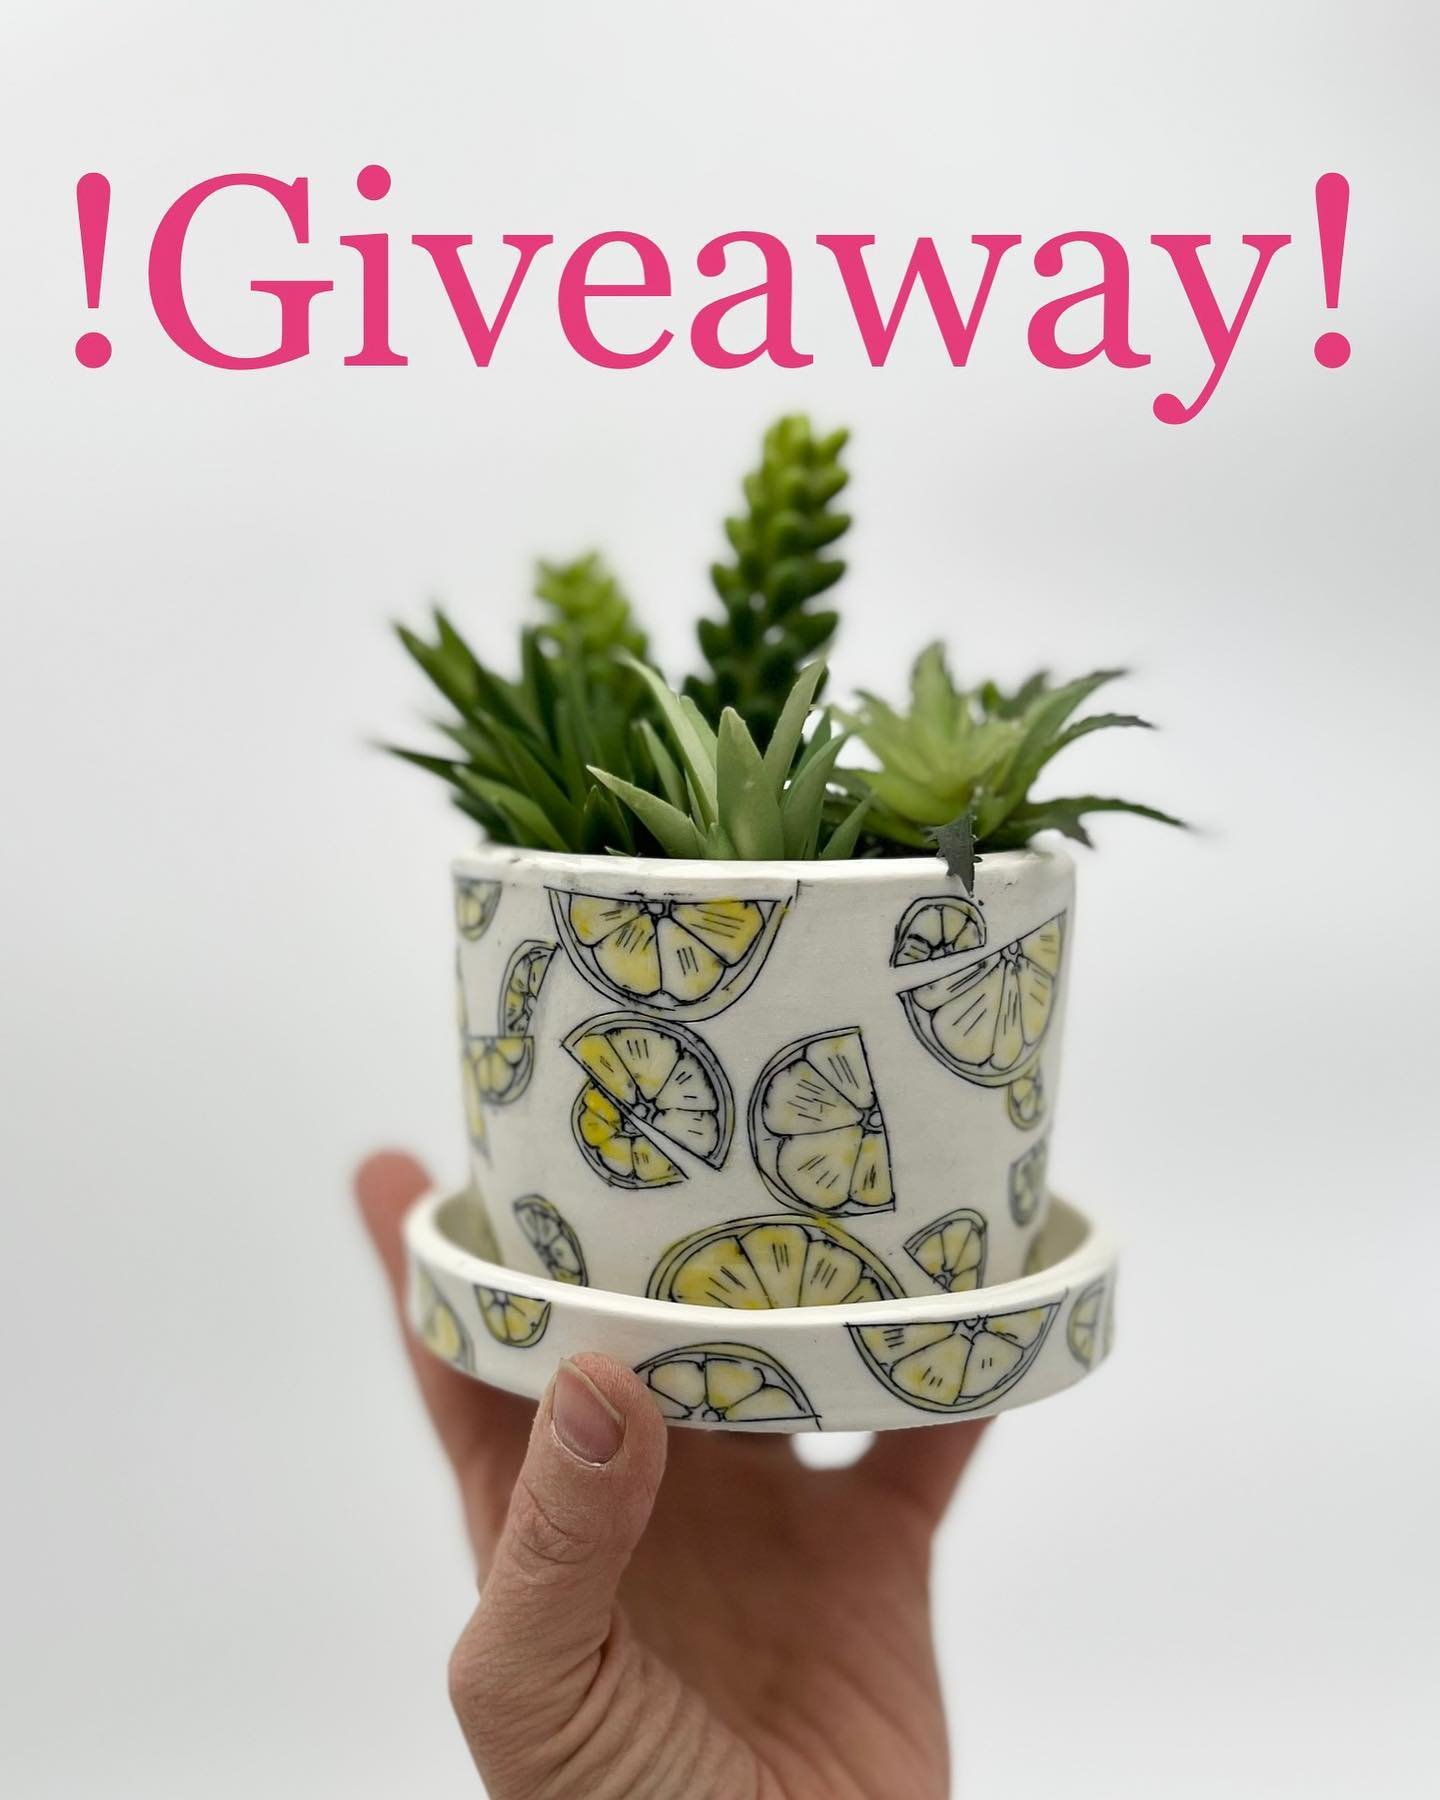 GIVEAWAY! GIVEAWAY! GIVEAWAY!
I am gifting this cute Lemonade planter to one lucky winner! 
To win:
1. Like photo and save this post 
2.follow me :)
3. Tag 3 people in comments ( hopefully they love plants and pots and don&rsquo;t already follow me )